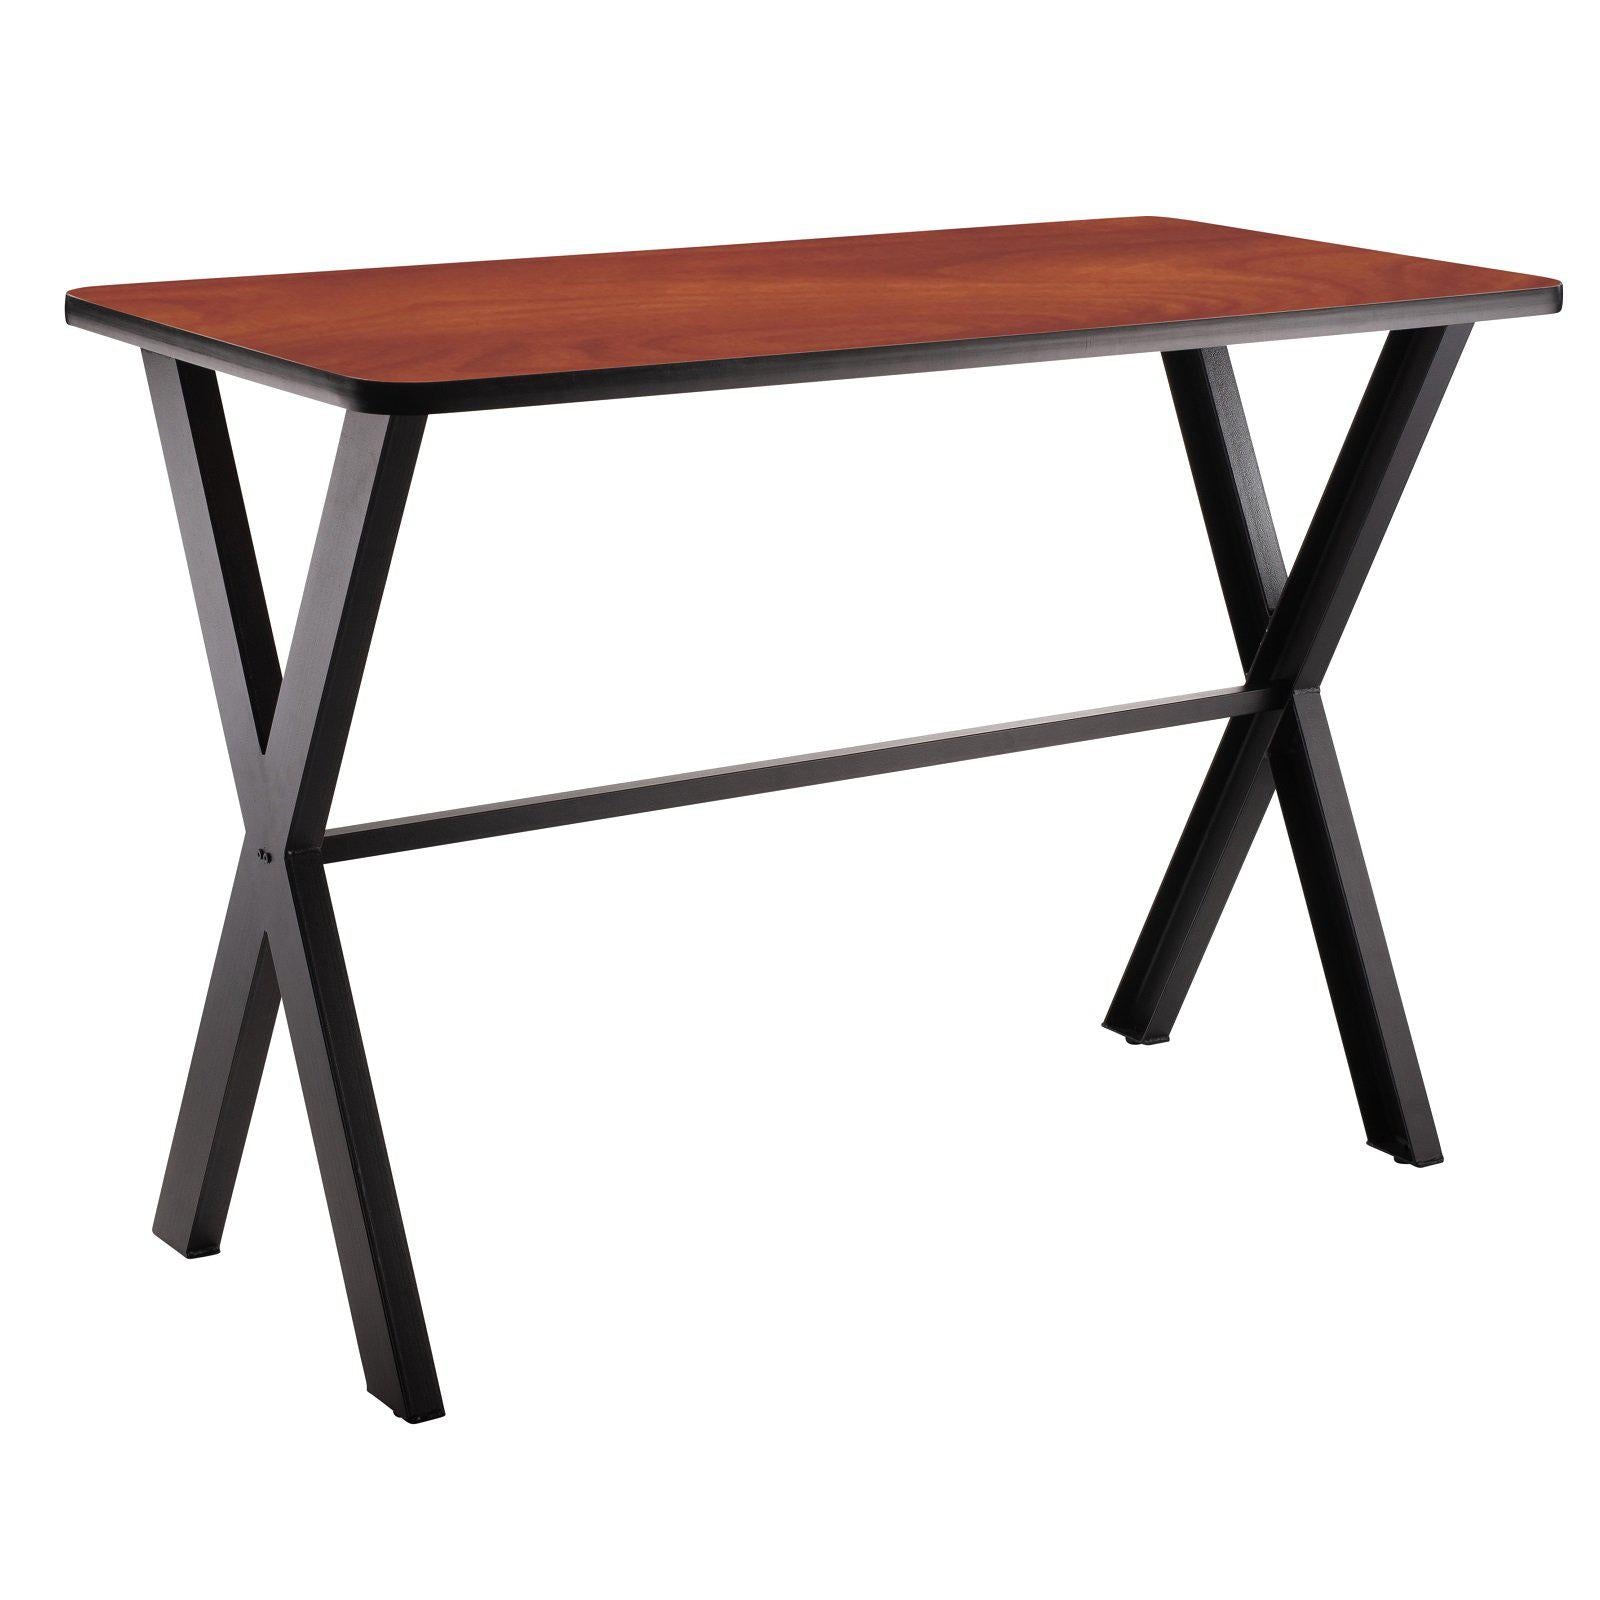 Collaborator Table, 36" x 60", Rectangle, 42" Bar Height w/ Crossbeam, High Pressure Laminate Top, Particleboard Core